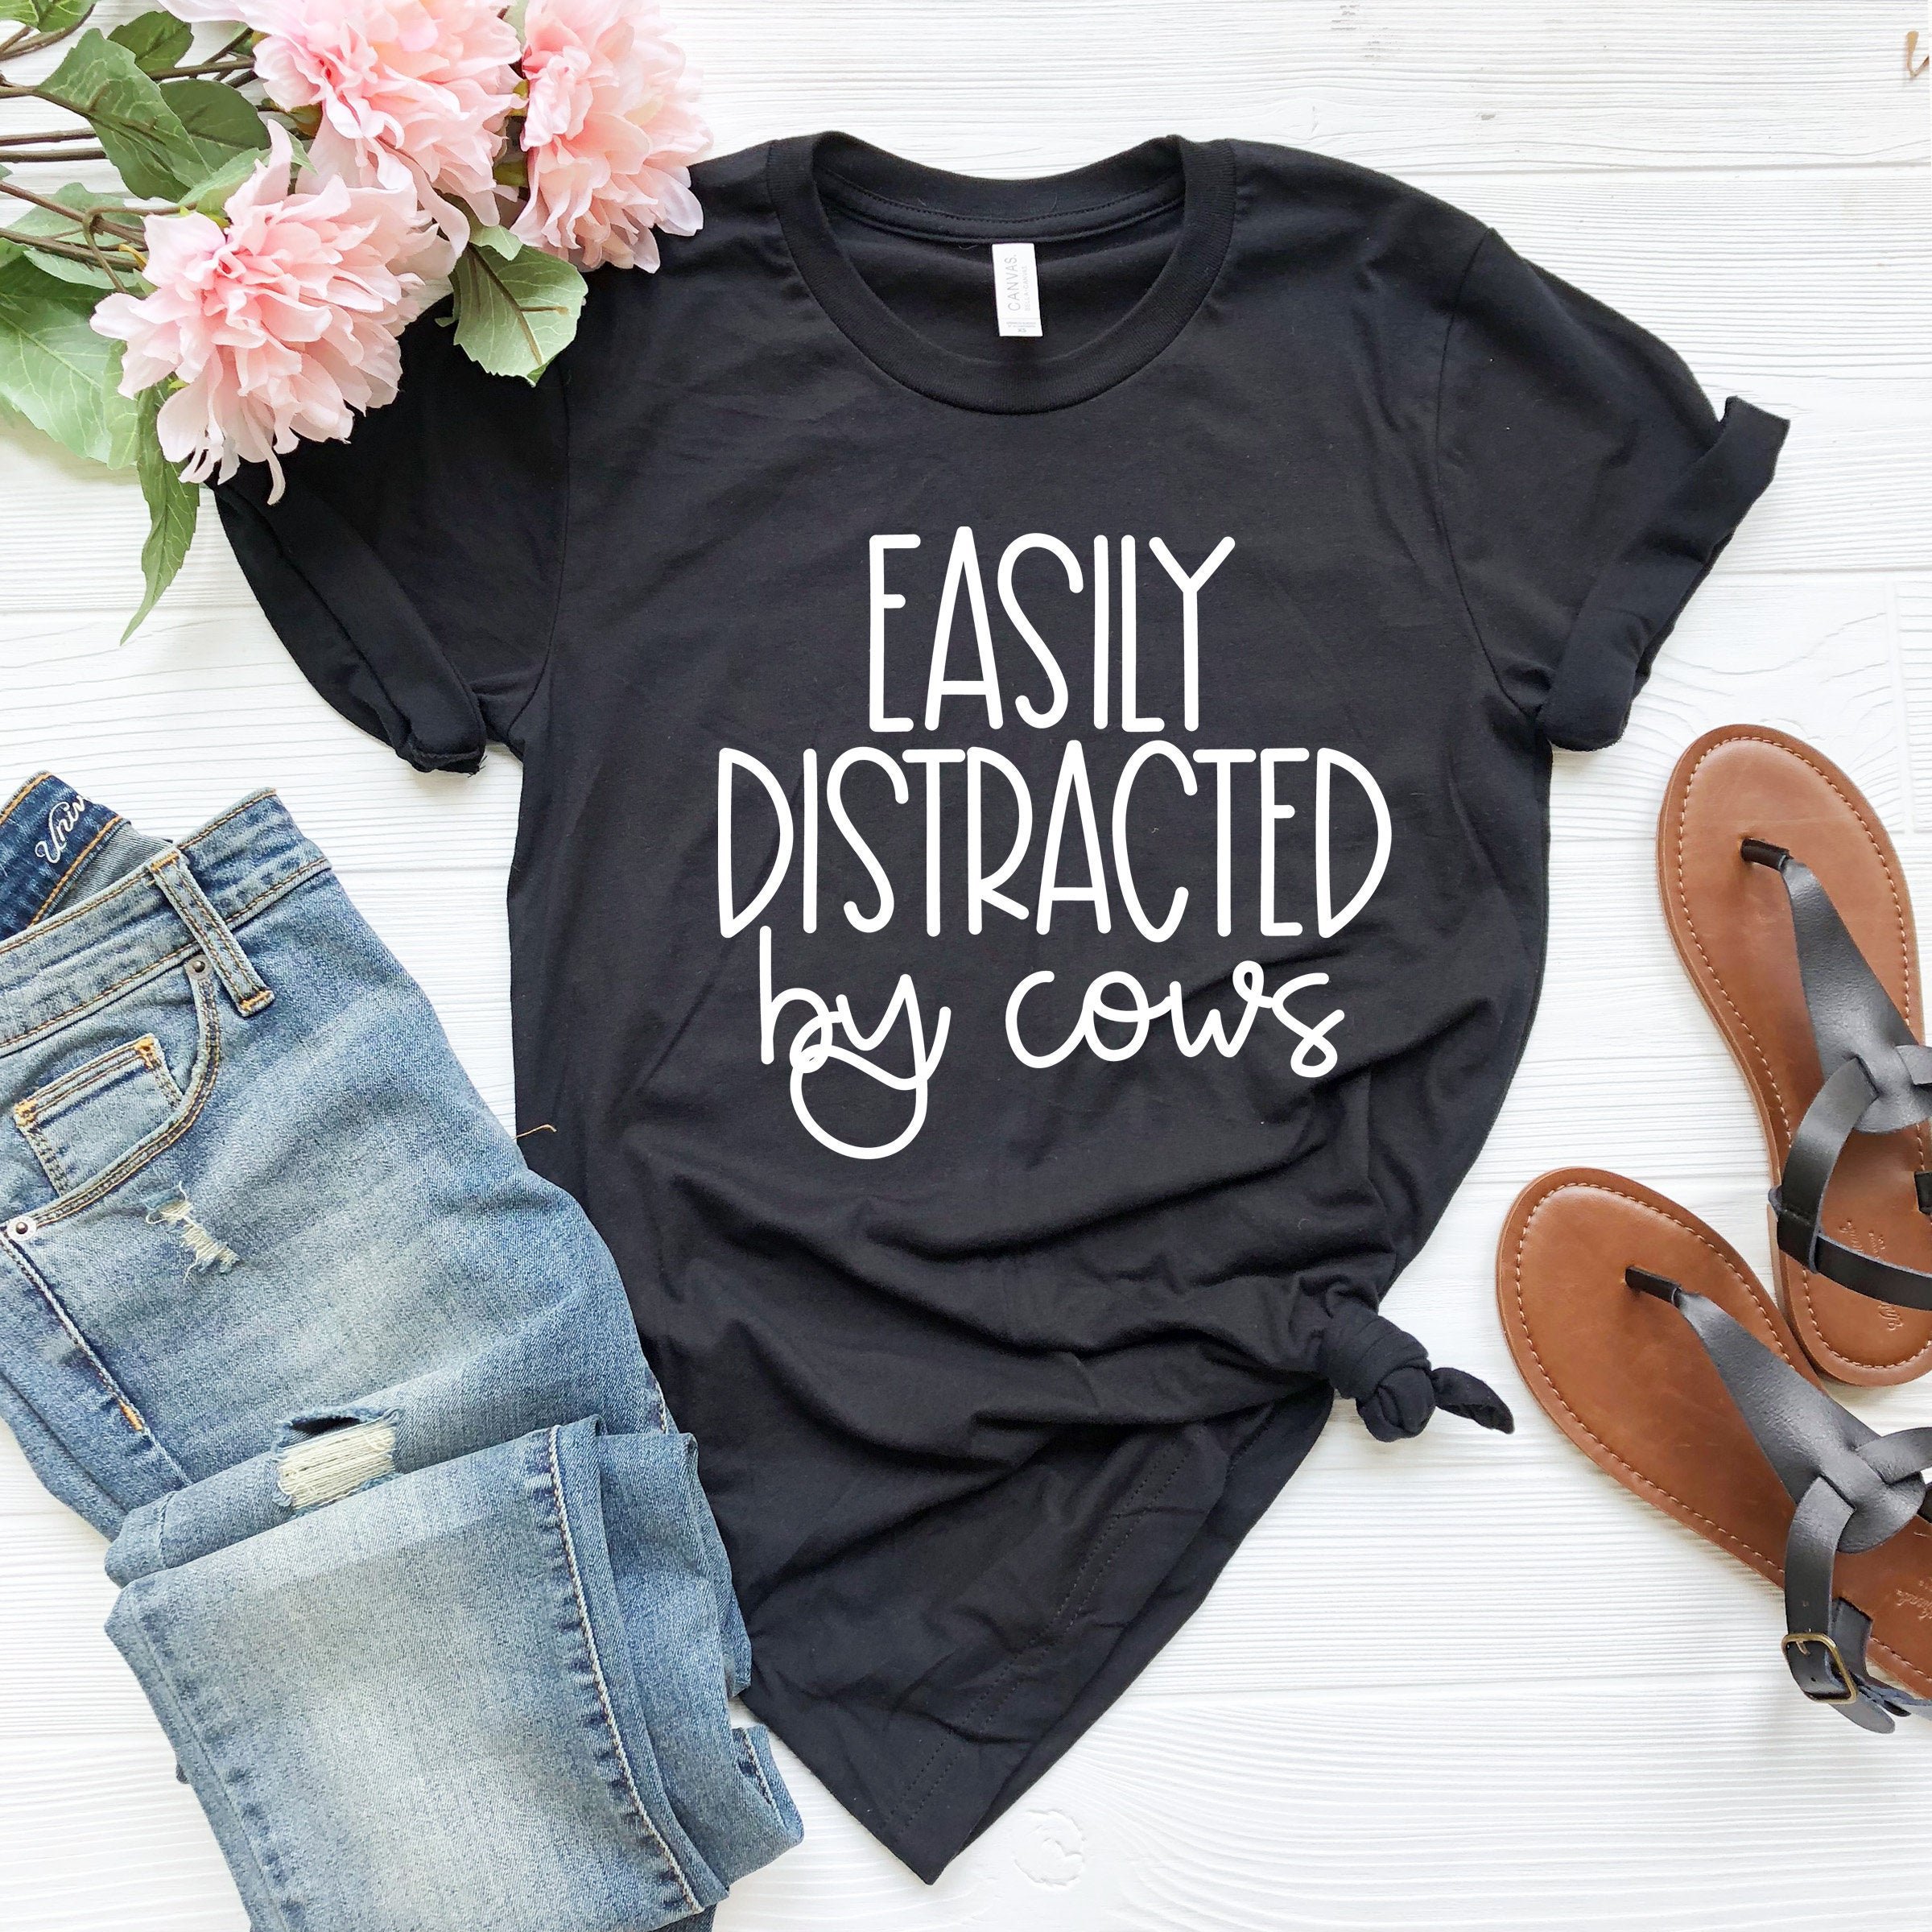 Easily Distracted By Cows Shirt, Funny Cow Tee, Cow Whisperer Tees ,Cow Mom Gift, Country Shirt, Dairy Farm, Cow Shirt, Farmer Shirt